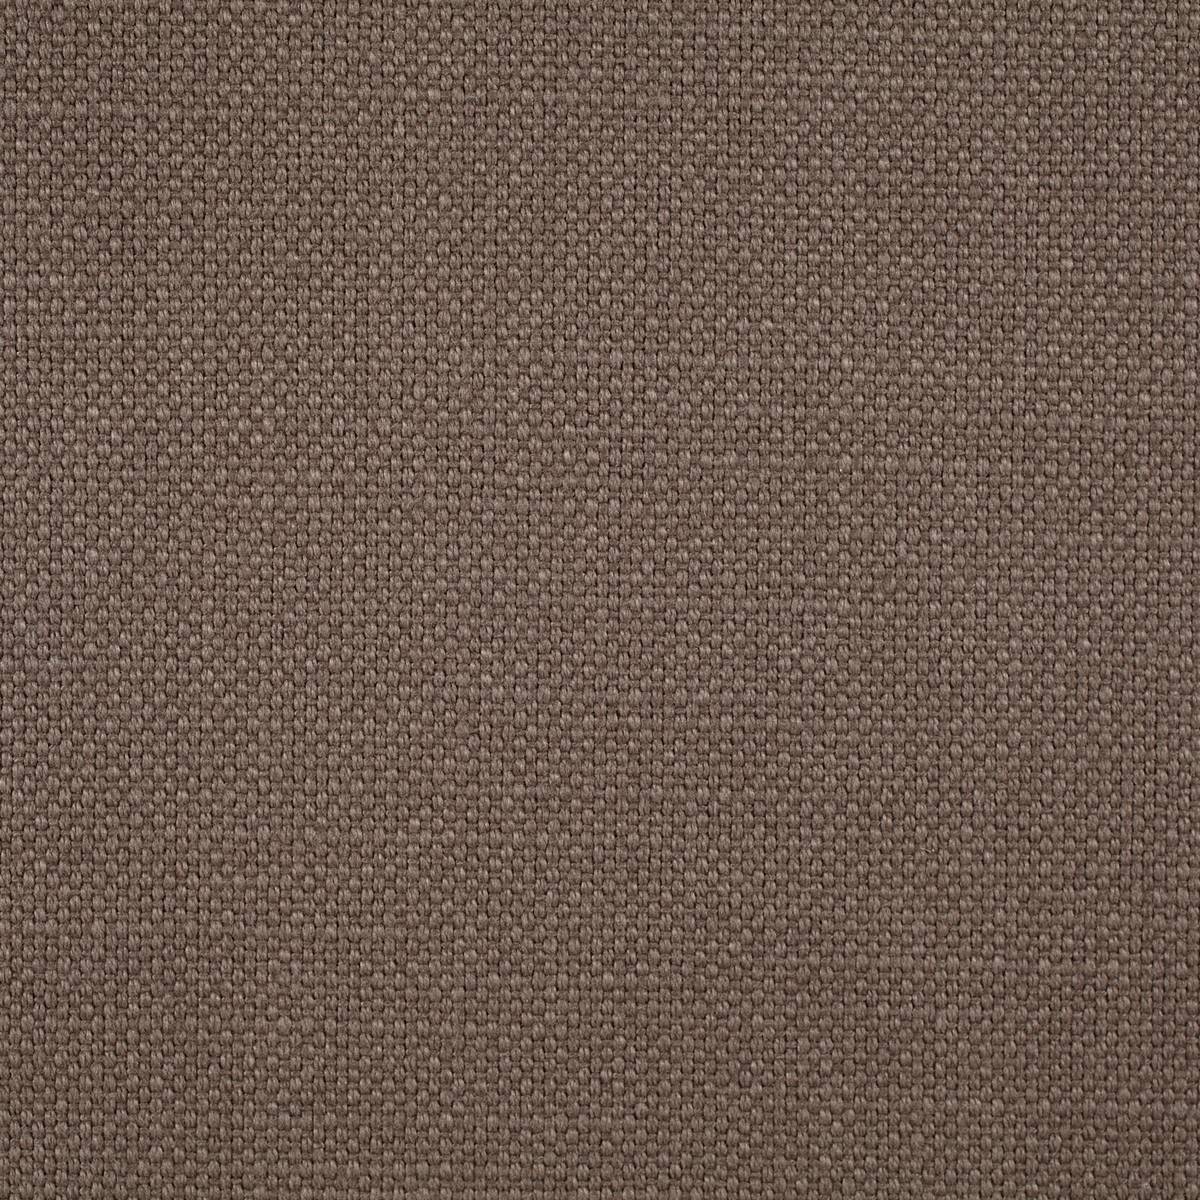 Arley Charcoal Fabric by Sanderson